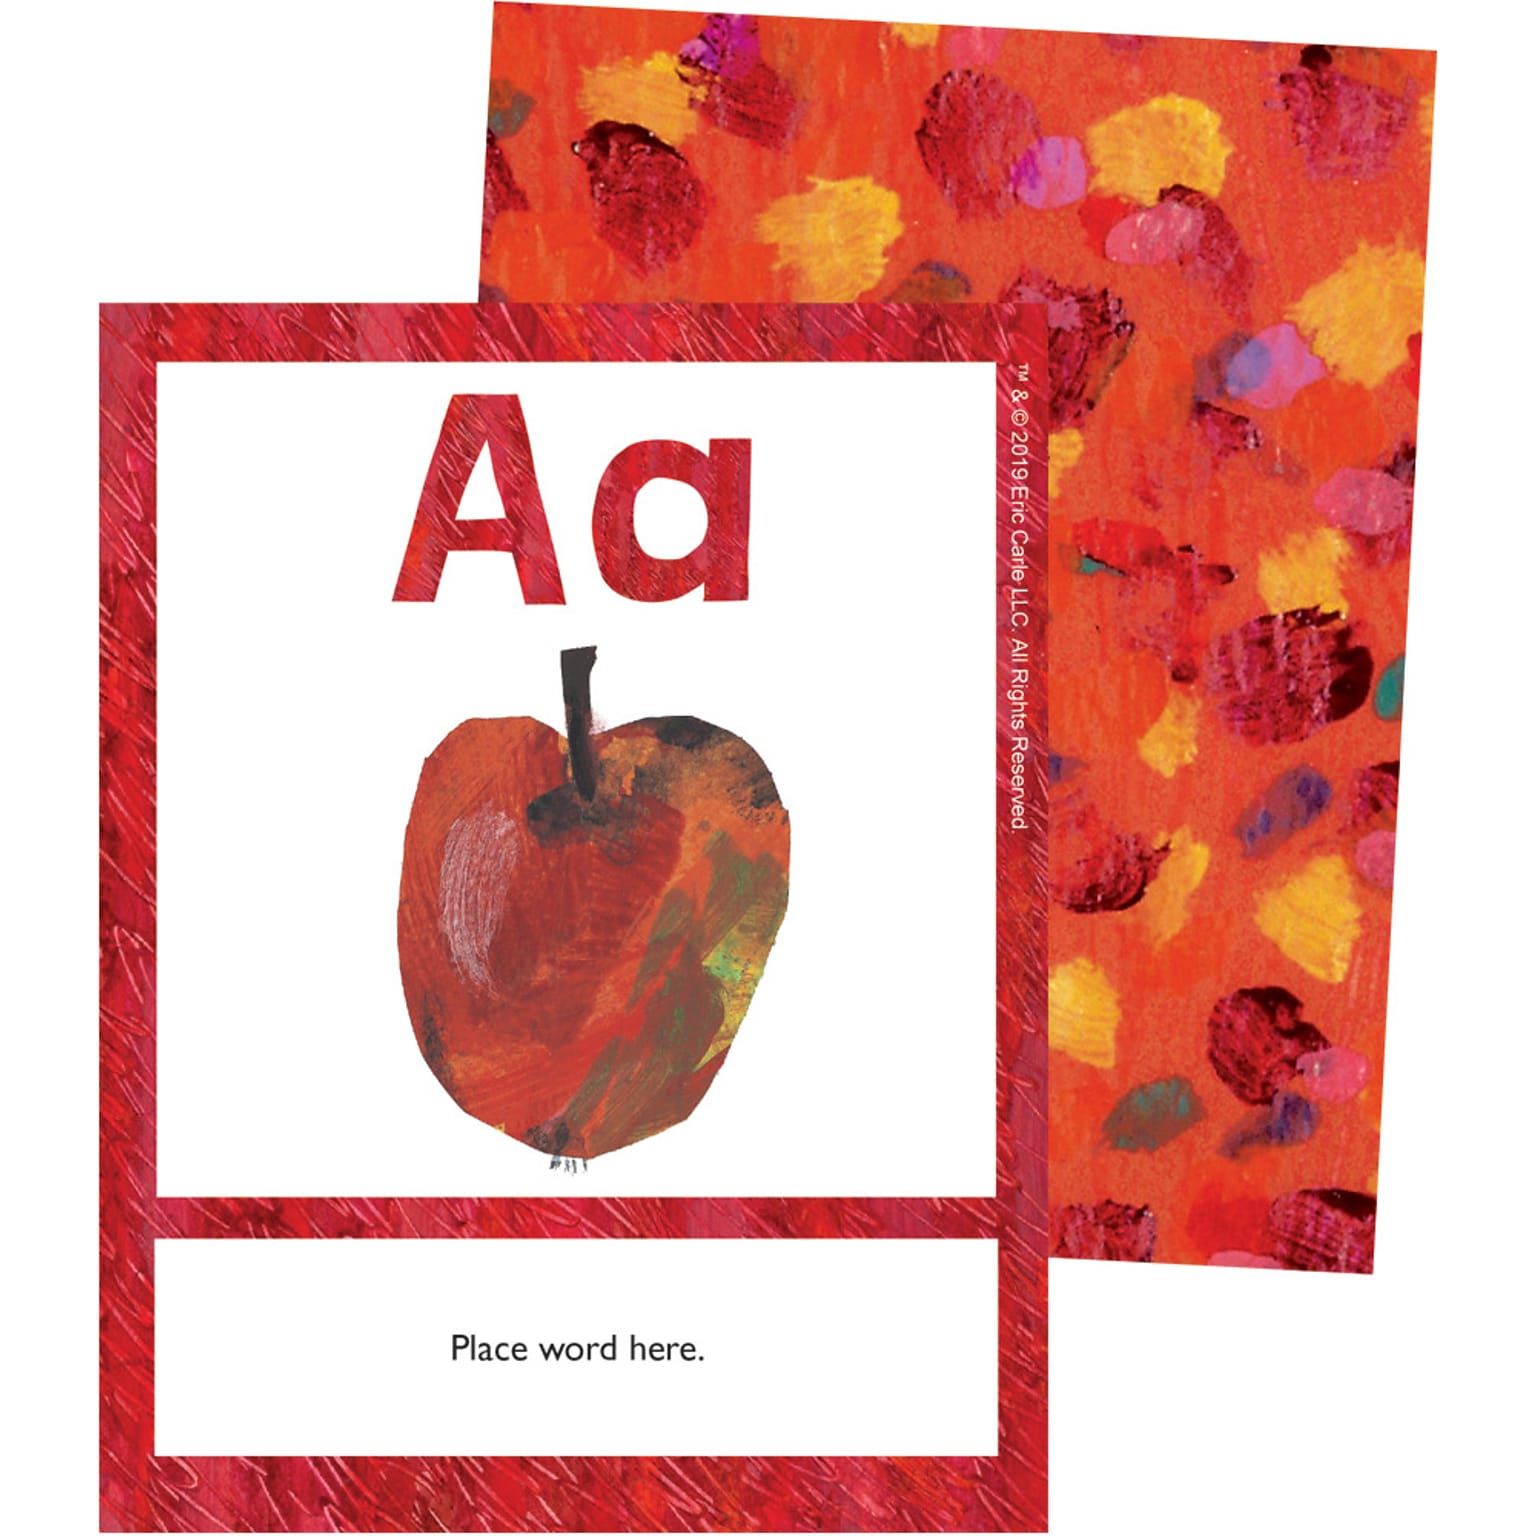 Carson Dellosa World of Eric Carle™ Alphabet Learning Cards (145131)